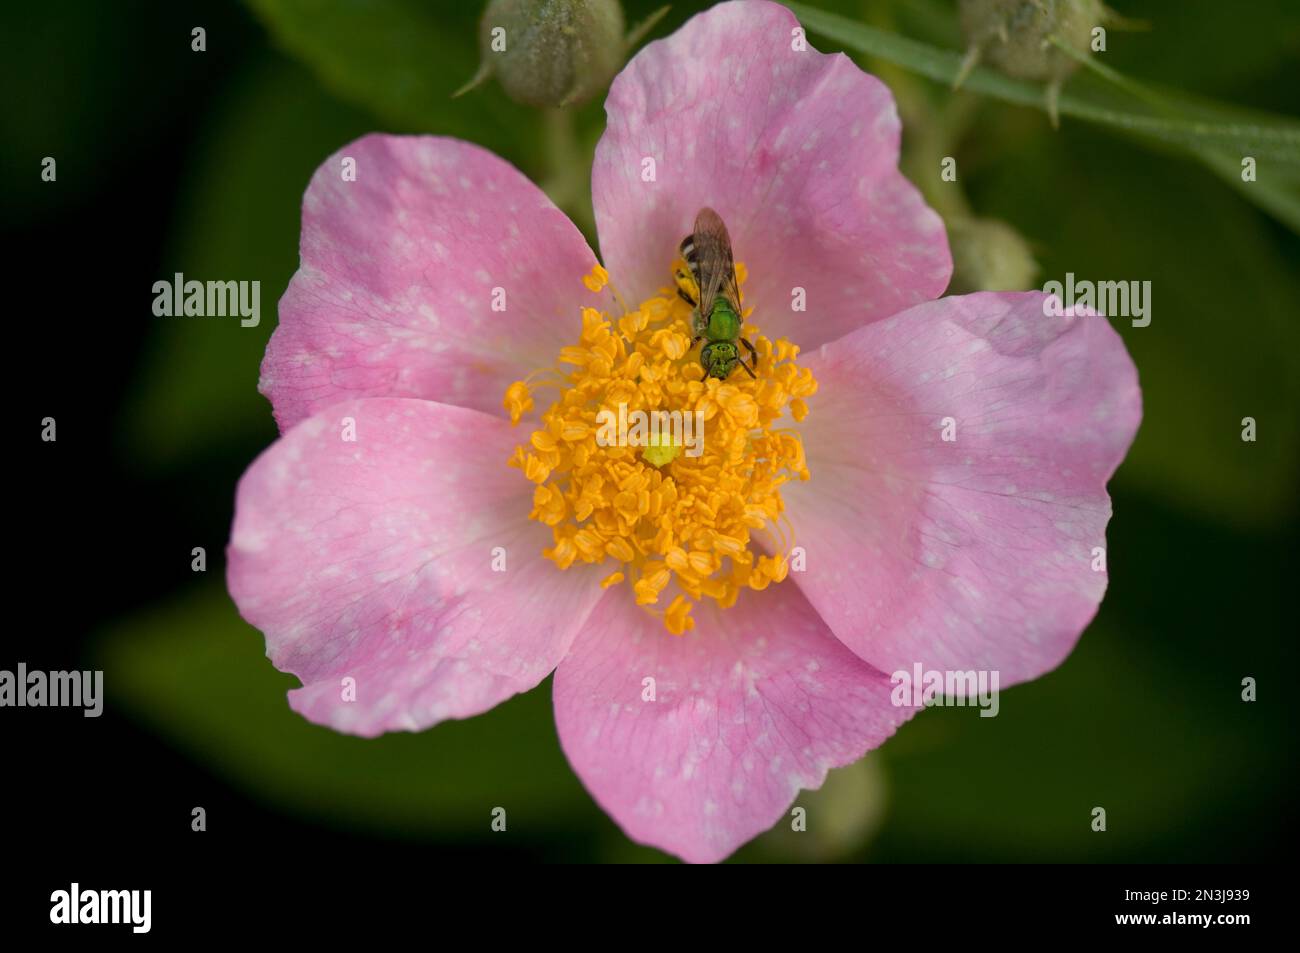 Close-up of a Carolina rose (Rosa sp.) with a pollinating insect; Baraboo, Wisconsin, United States of America Stock Photo